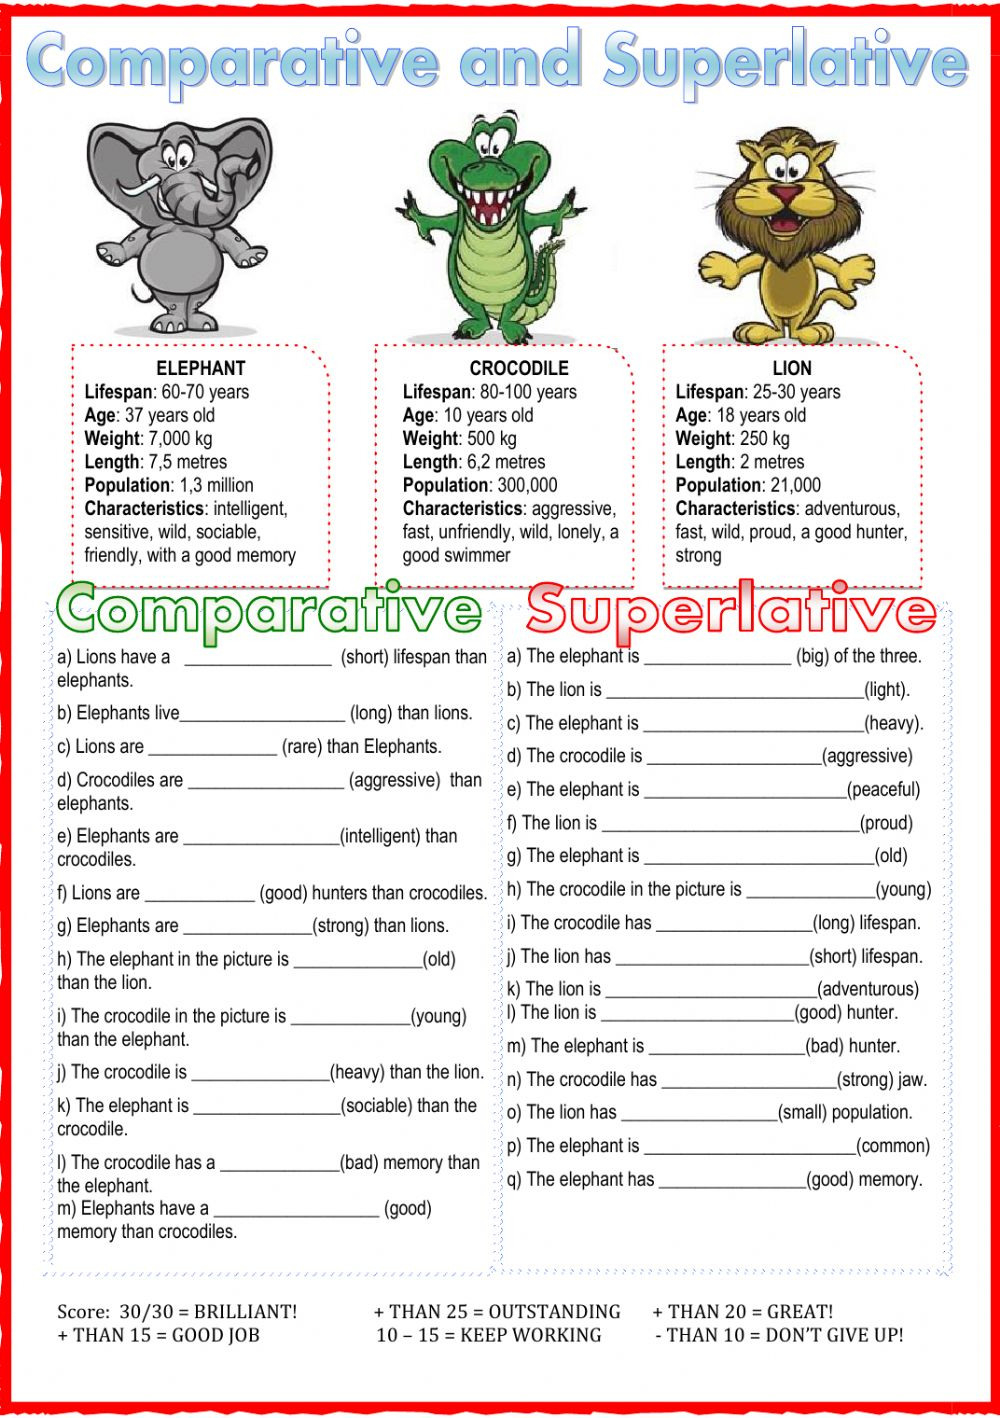 13-best-images-of-comparatives-and-superlative-worksheets-easy-comparative-and-superlative